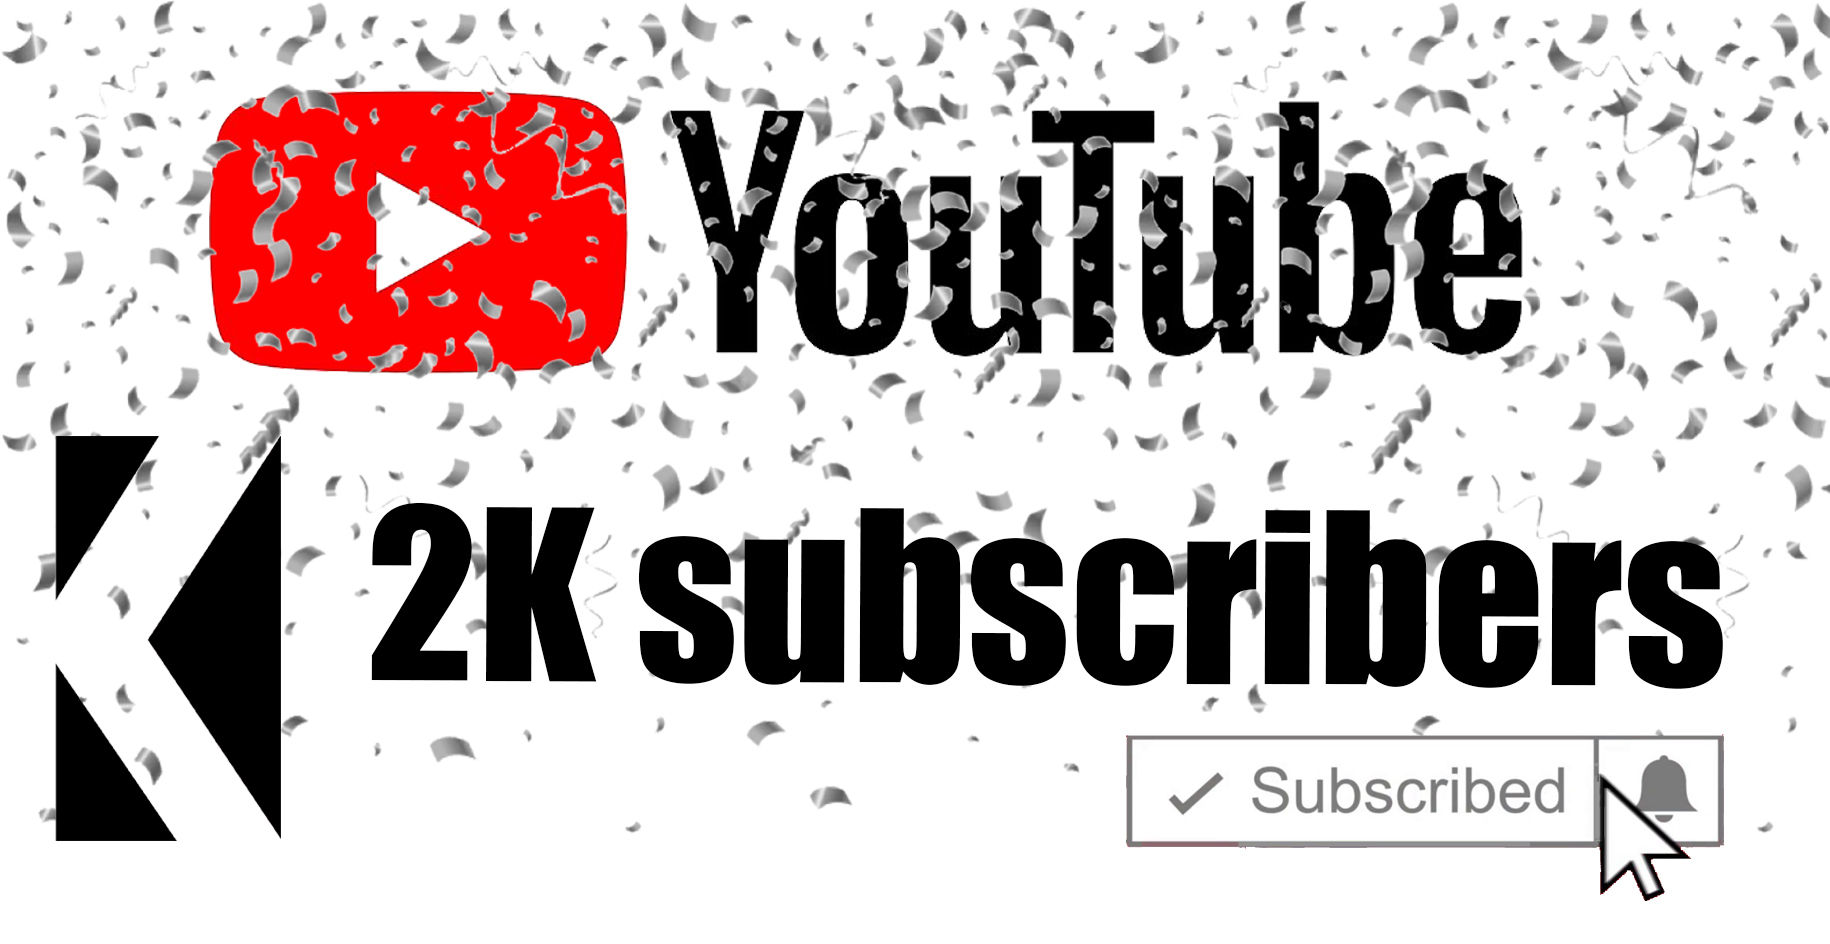 Thanks 2000 subscribers. Youtube thank